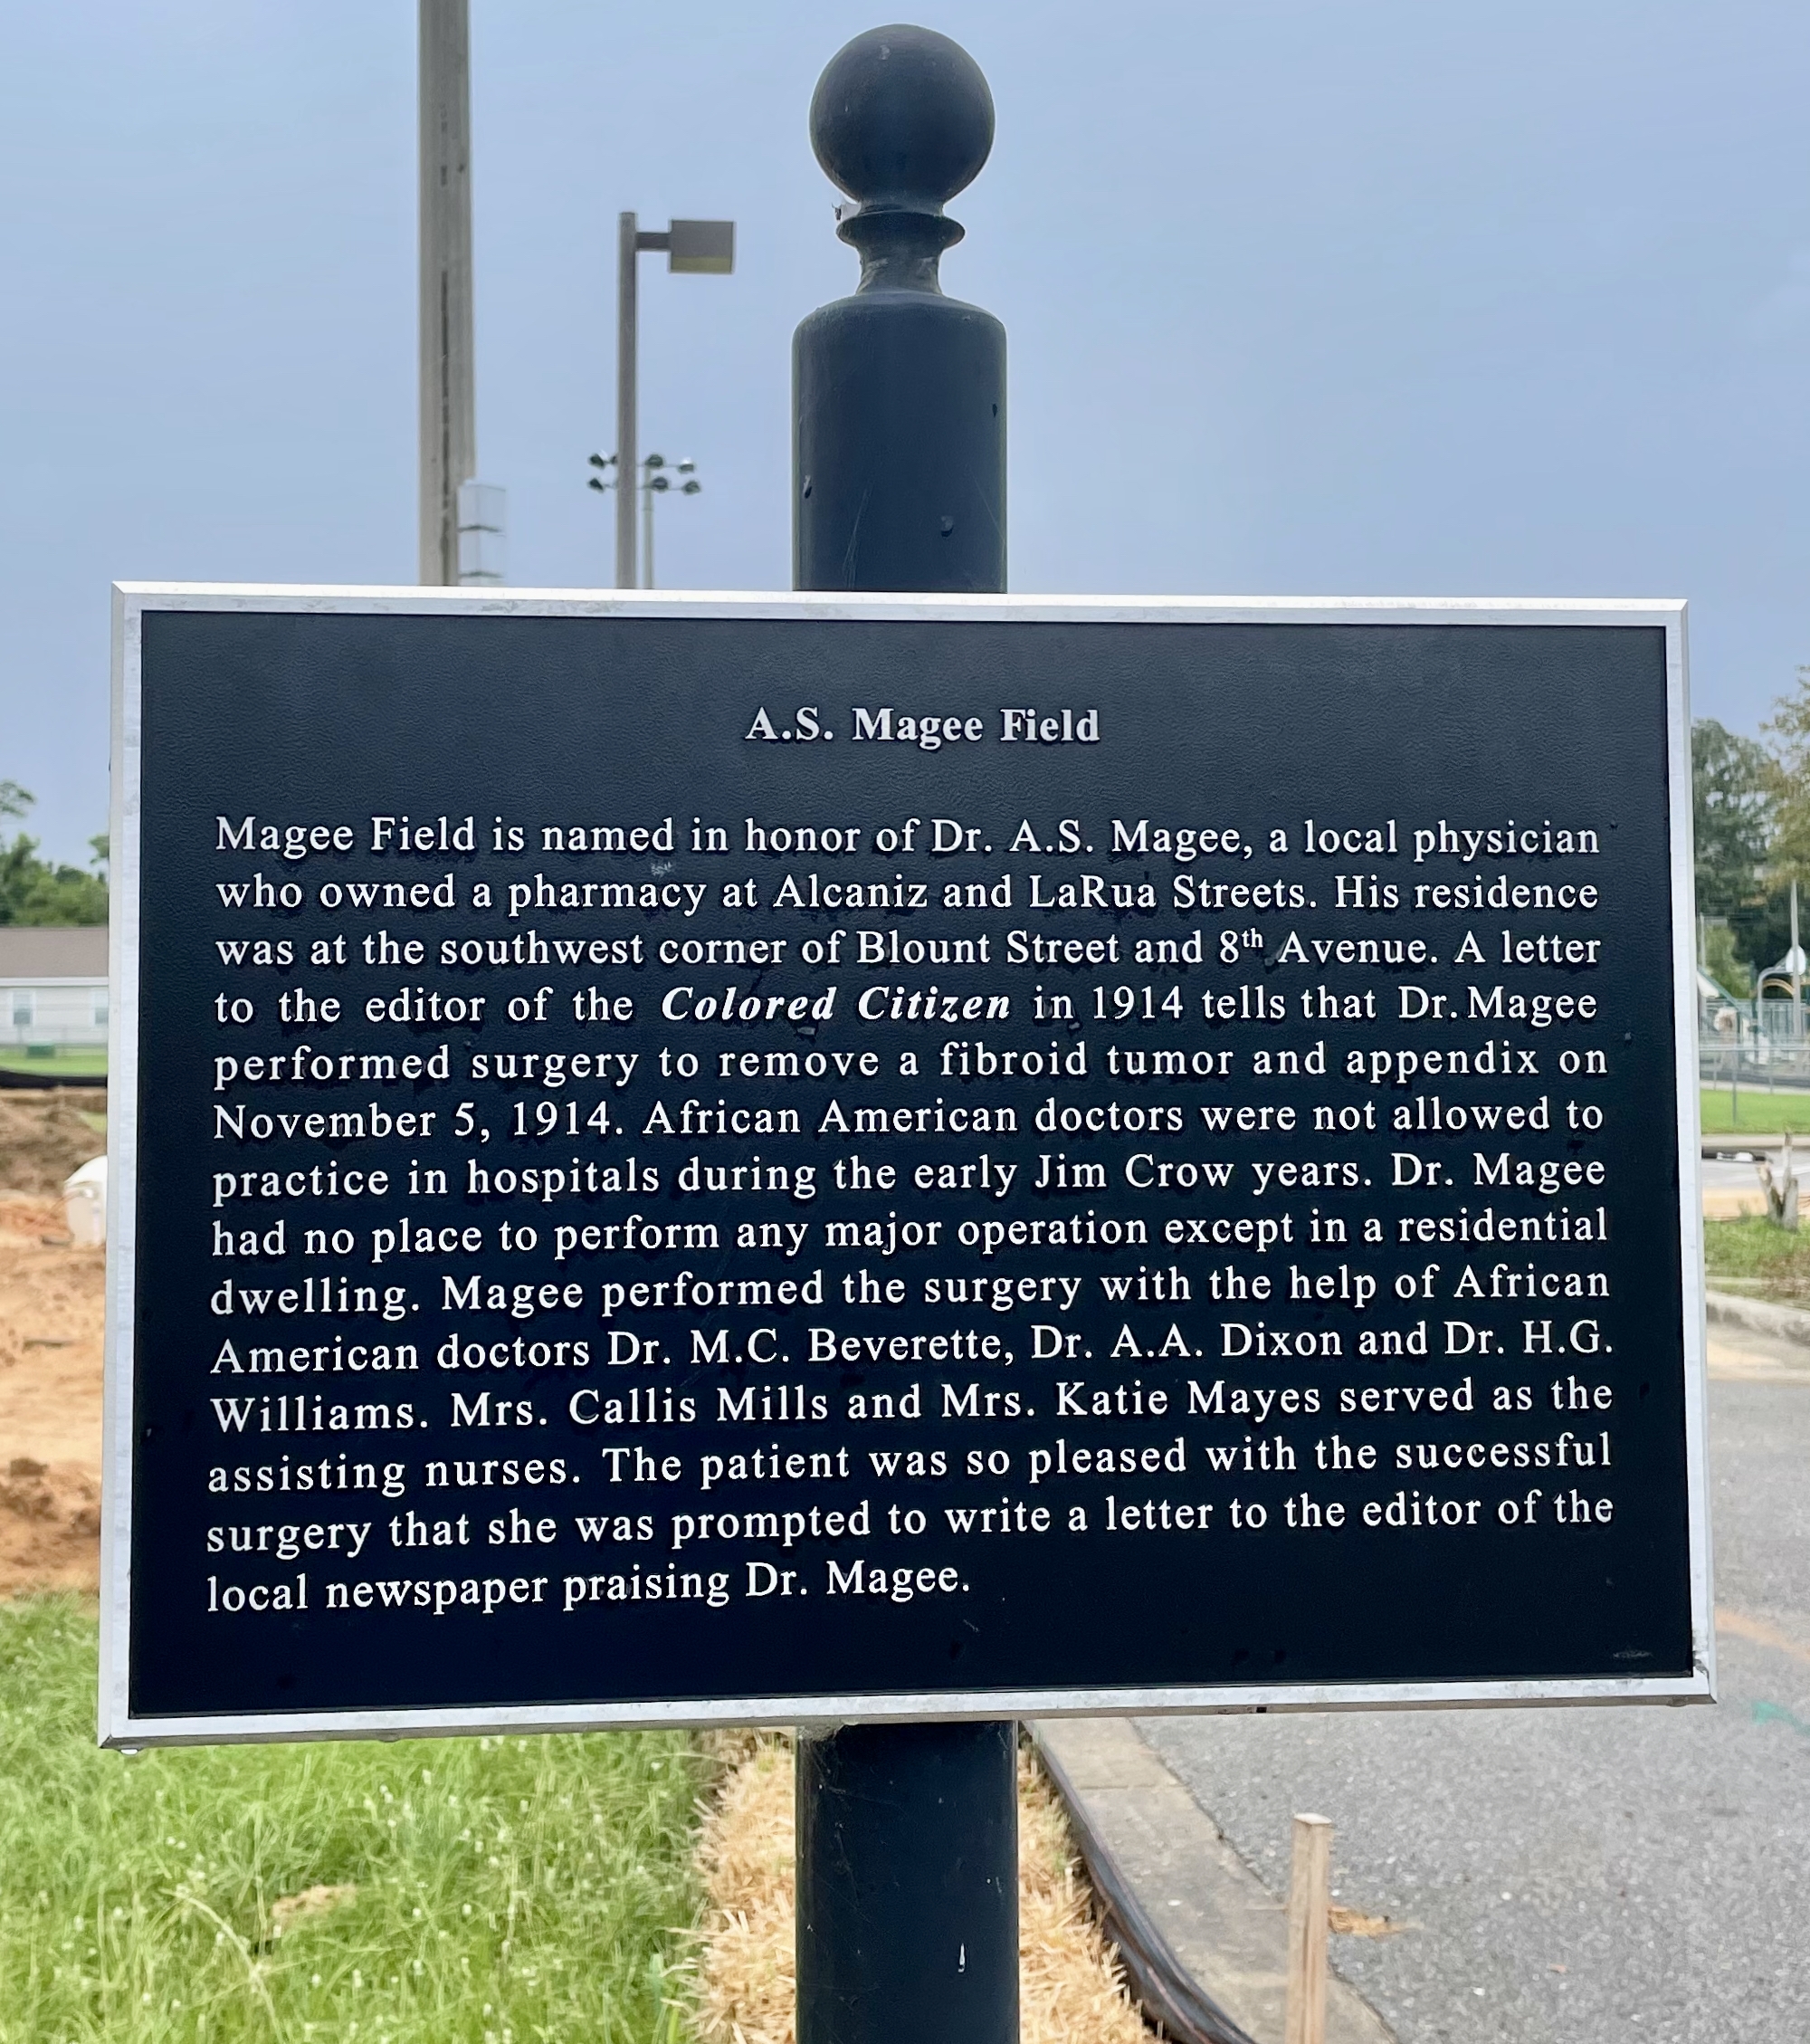 A.S. Magee Field Marker